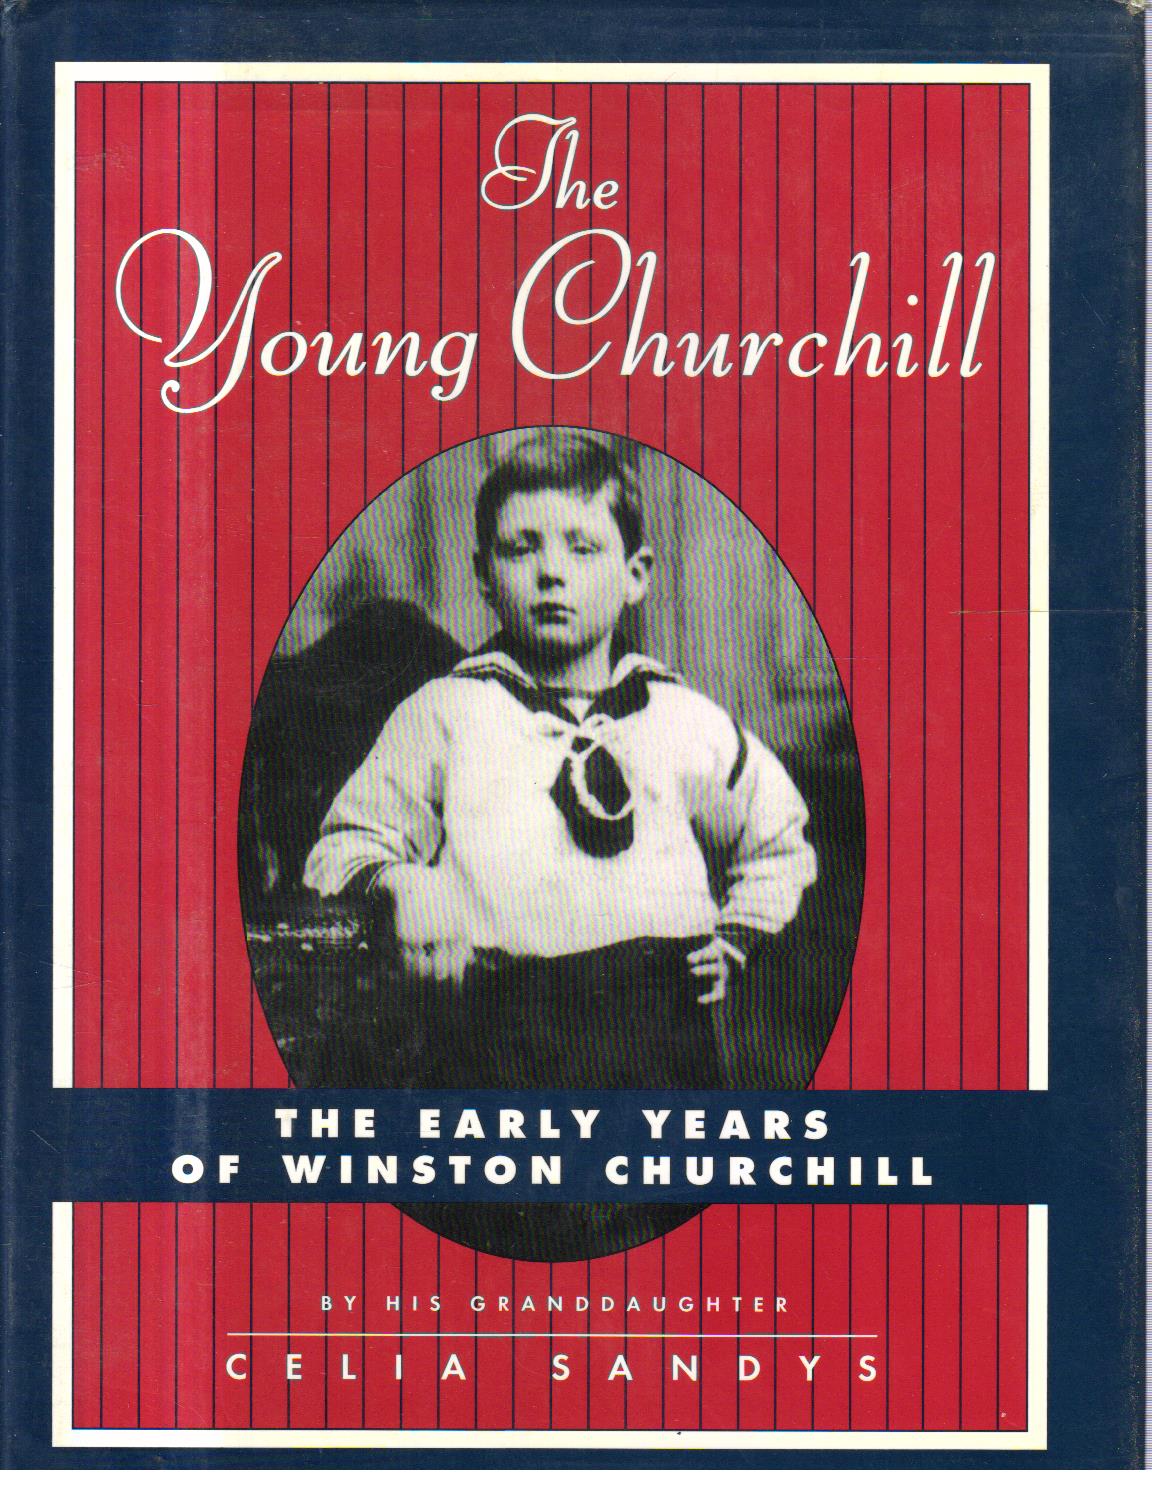 The Young Churchill the early years of Winston Churchill